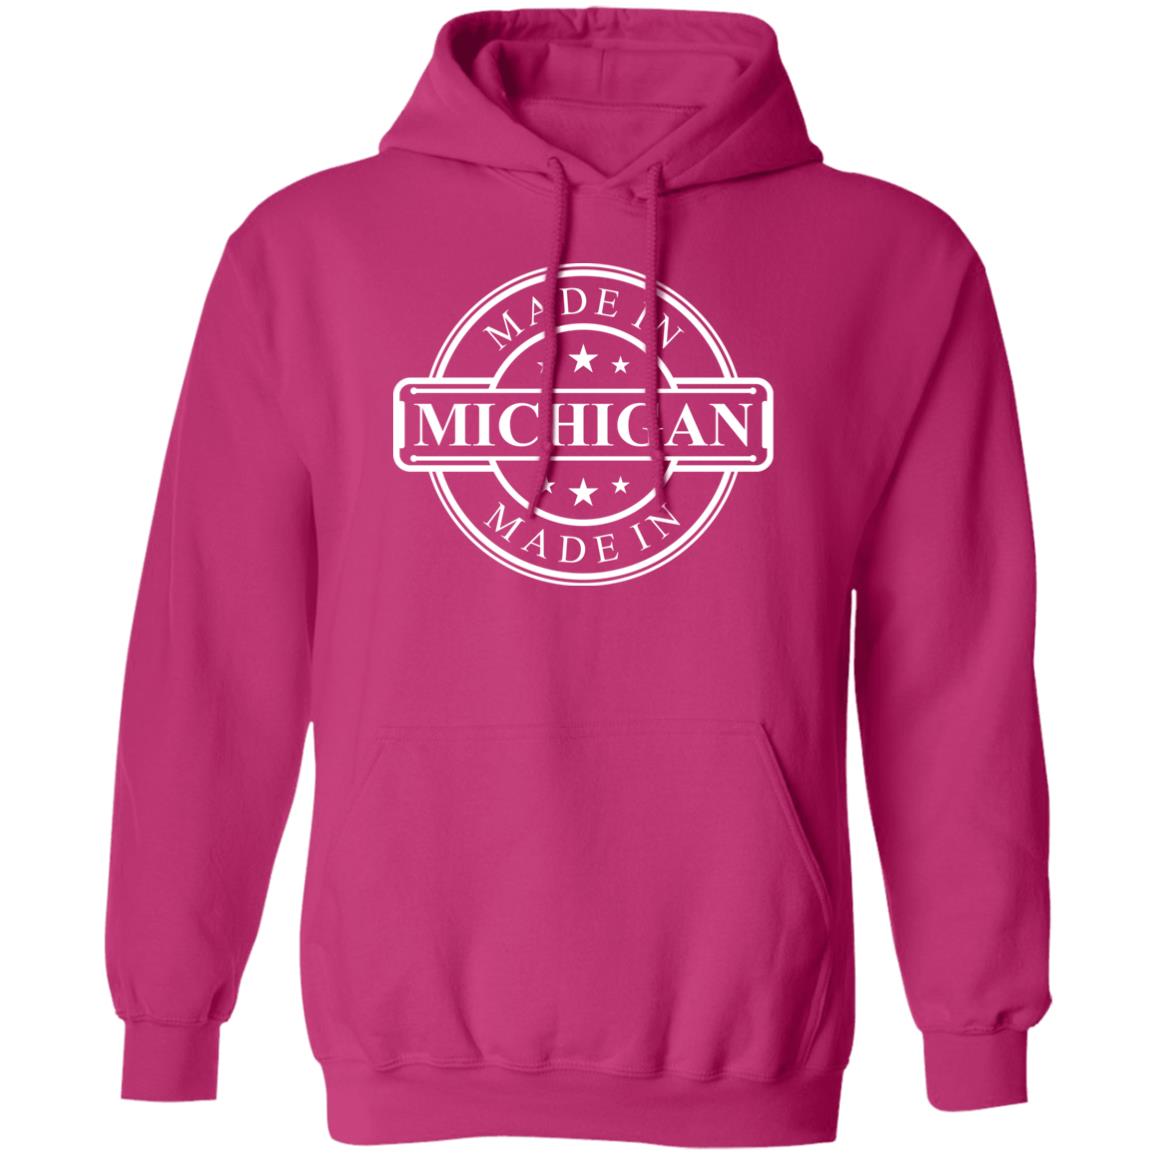 Made in Michigan - White G185 Pullover Hoodie